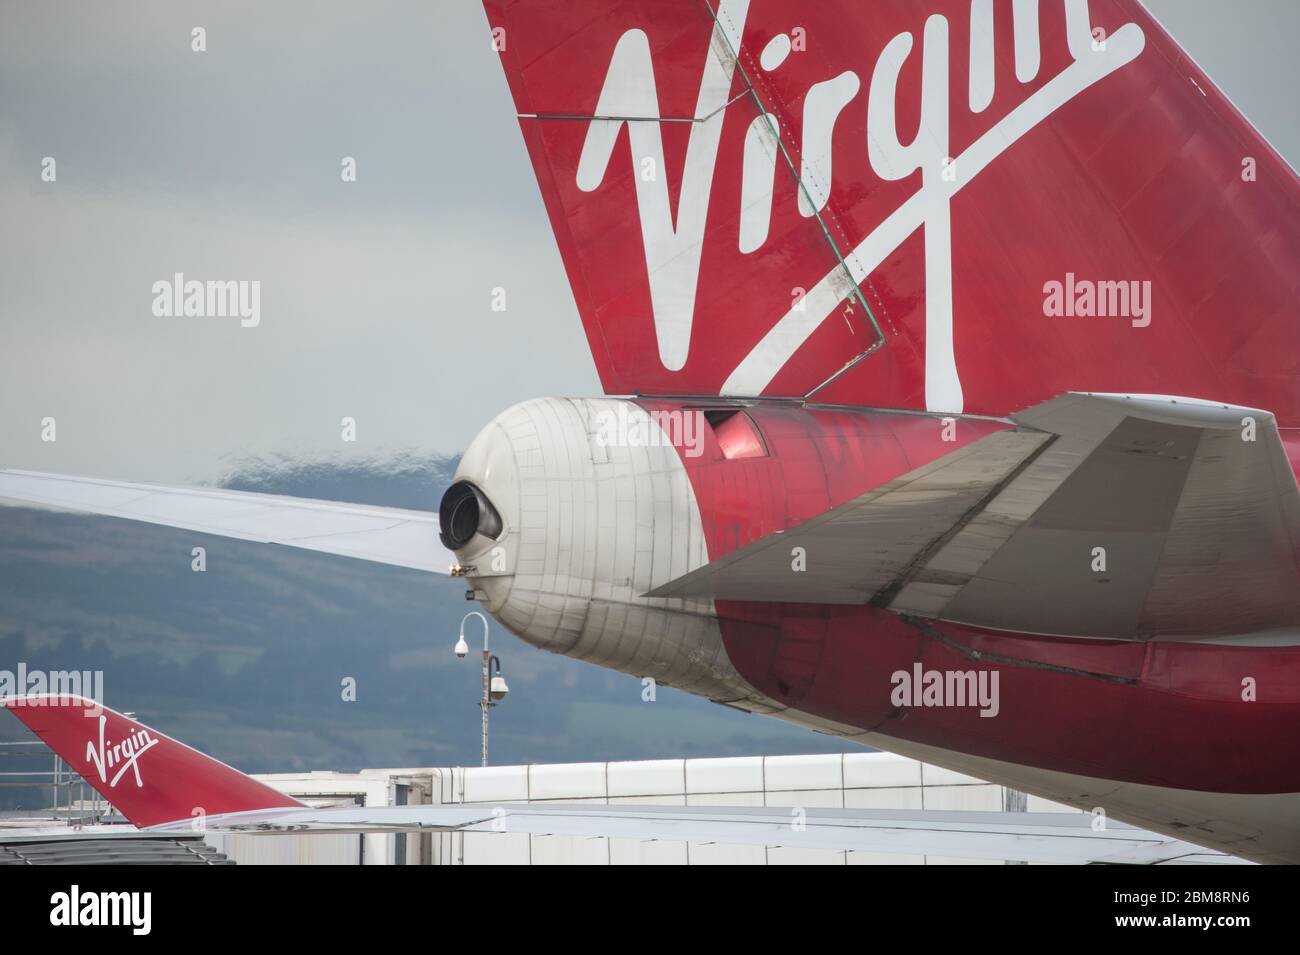 Glasgow, UK. 25 August 2019.  Pictured: Virgin Atlantic Boeing 747-400 reg G-VROM nicknamed Barbarella is one of the long haul wide die body aircraft in Virgin's leisure fleet. Normally covering London Gatwick, this aircraft serves Glasgow 3 times per week. Stock Photo